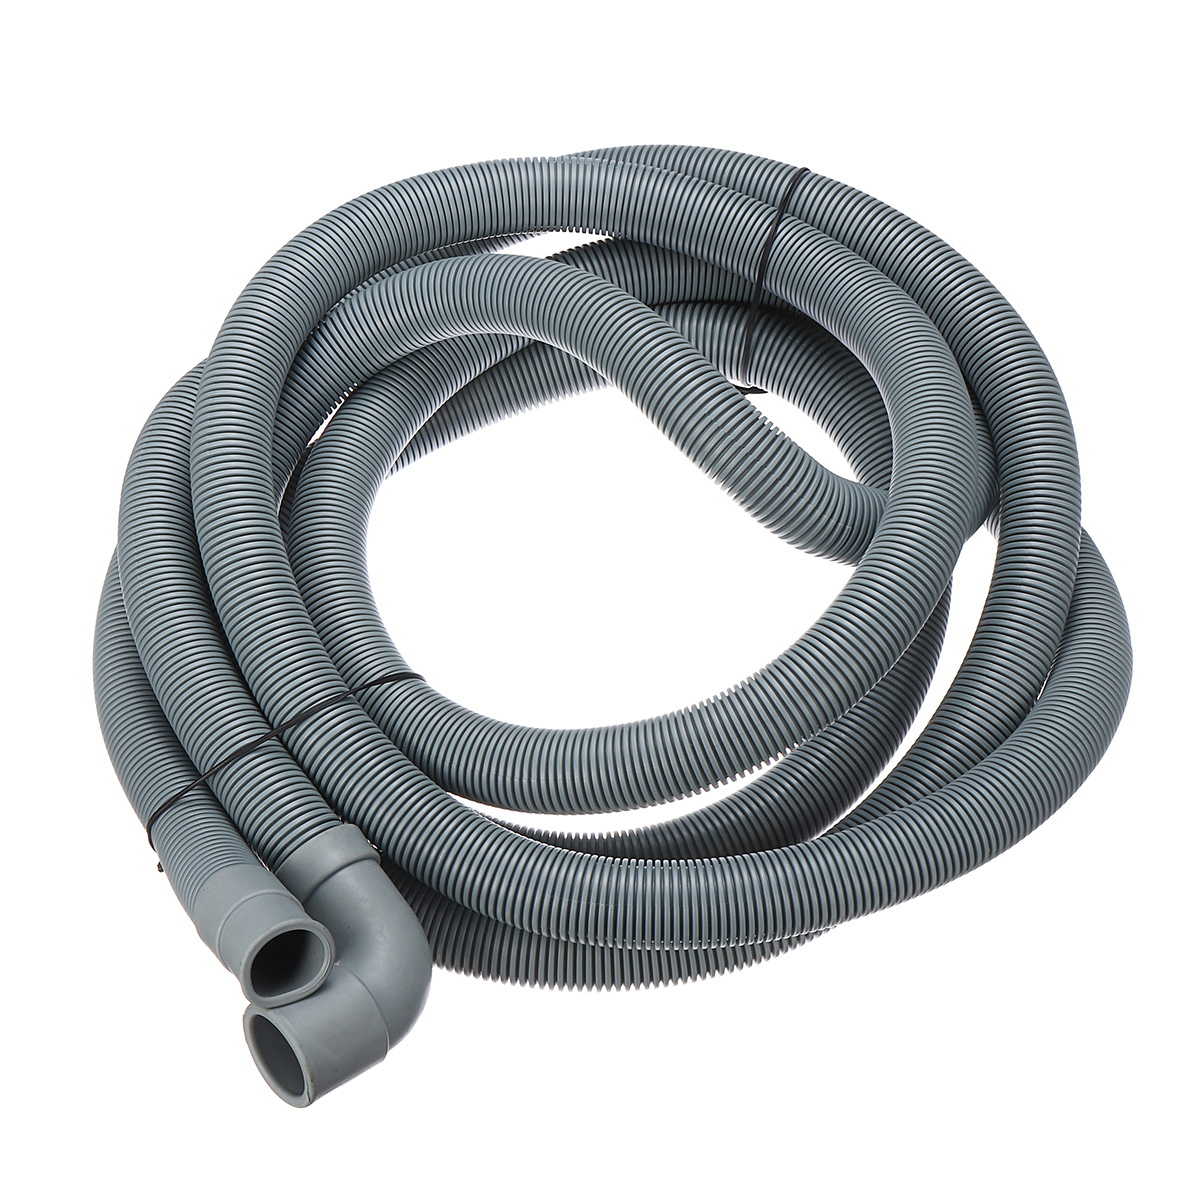 4M-Wash-Machine-Dishwasher-Drain-Hose-Outlet-Water-Pipe-Flexible-Extension-22mm-With-Bracket-1358132-2